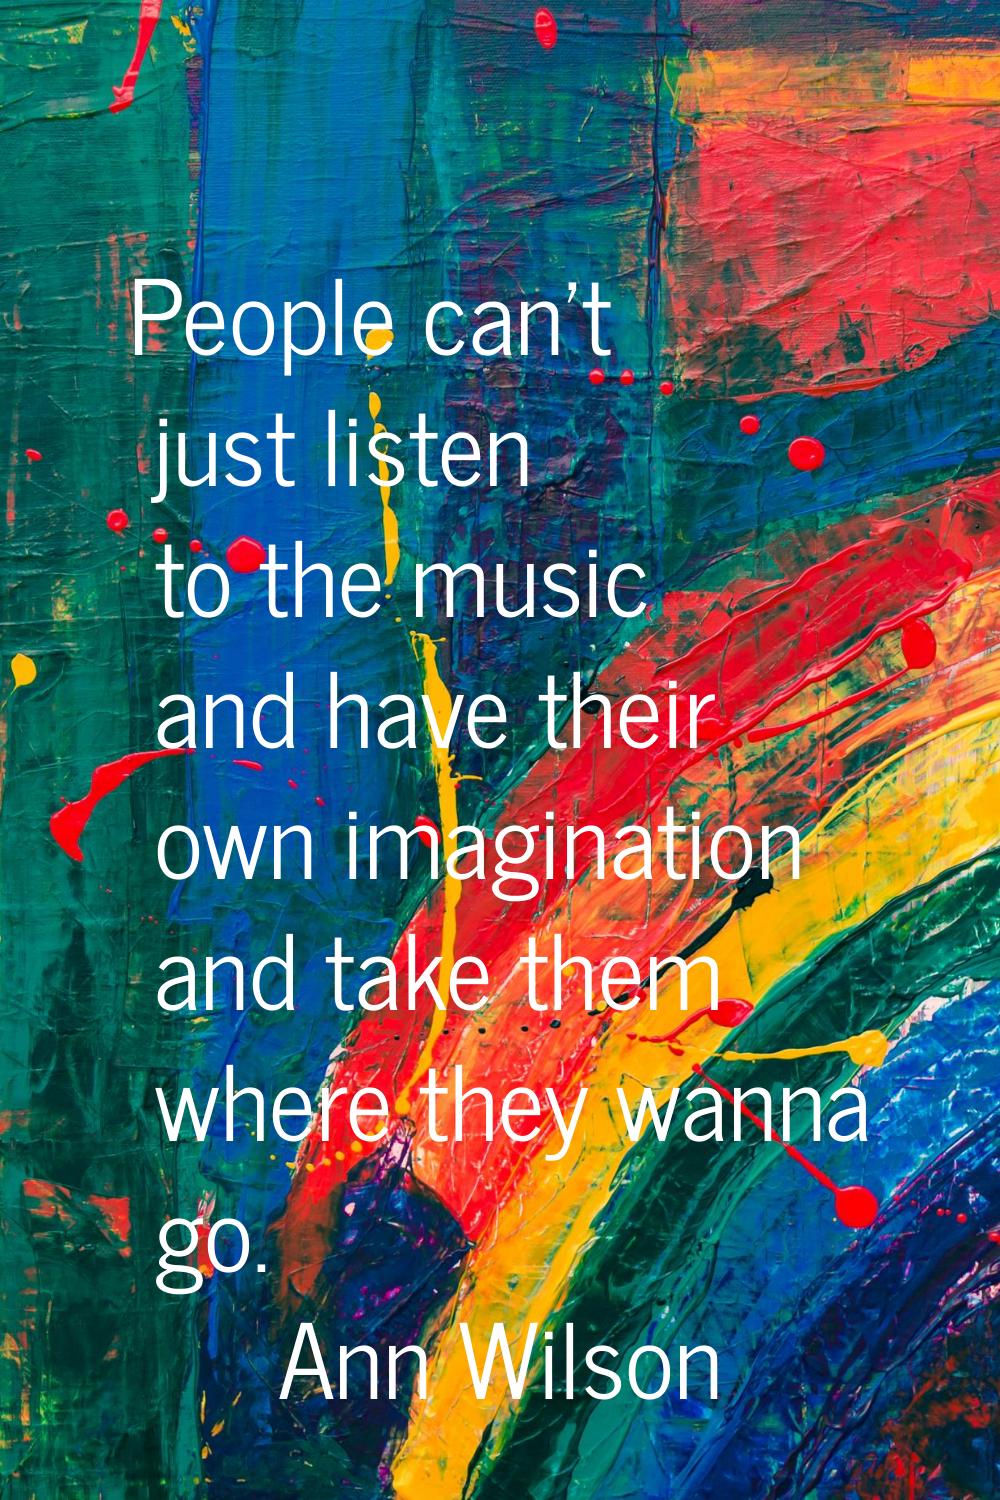 People can't just listen to the music and have their own imagination and take them where they wanna